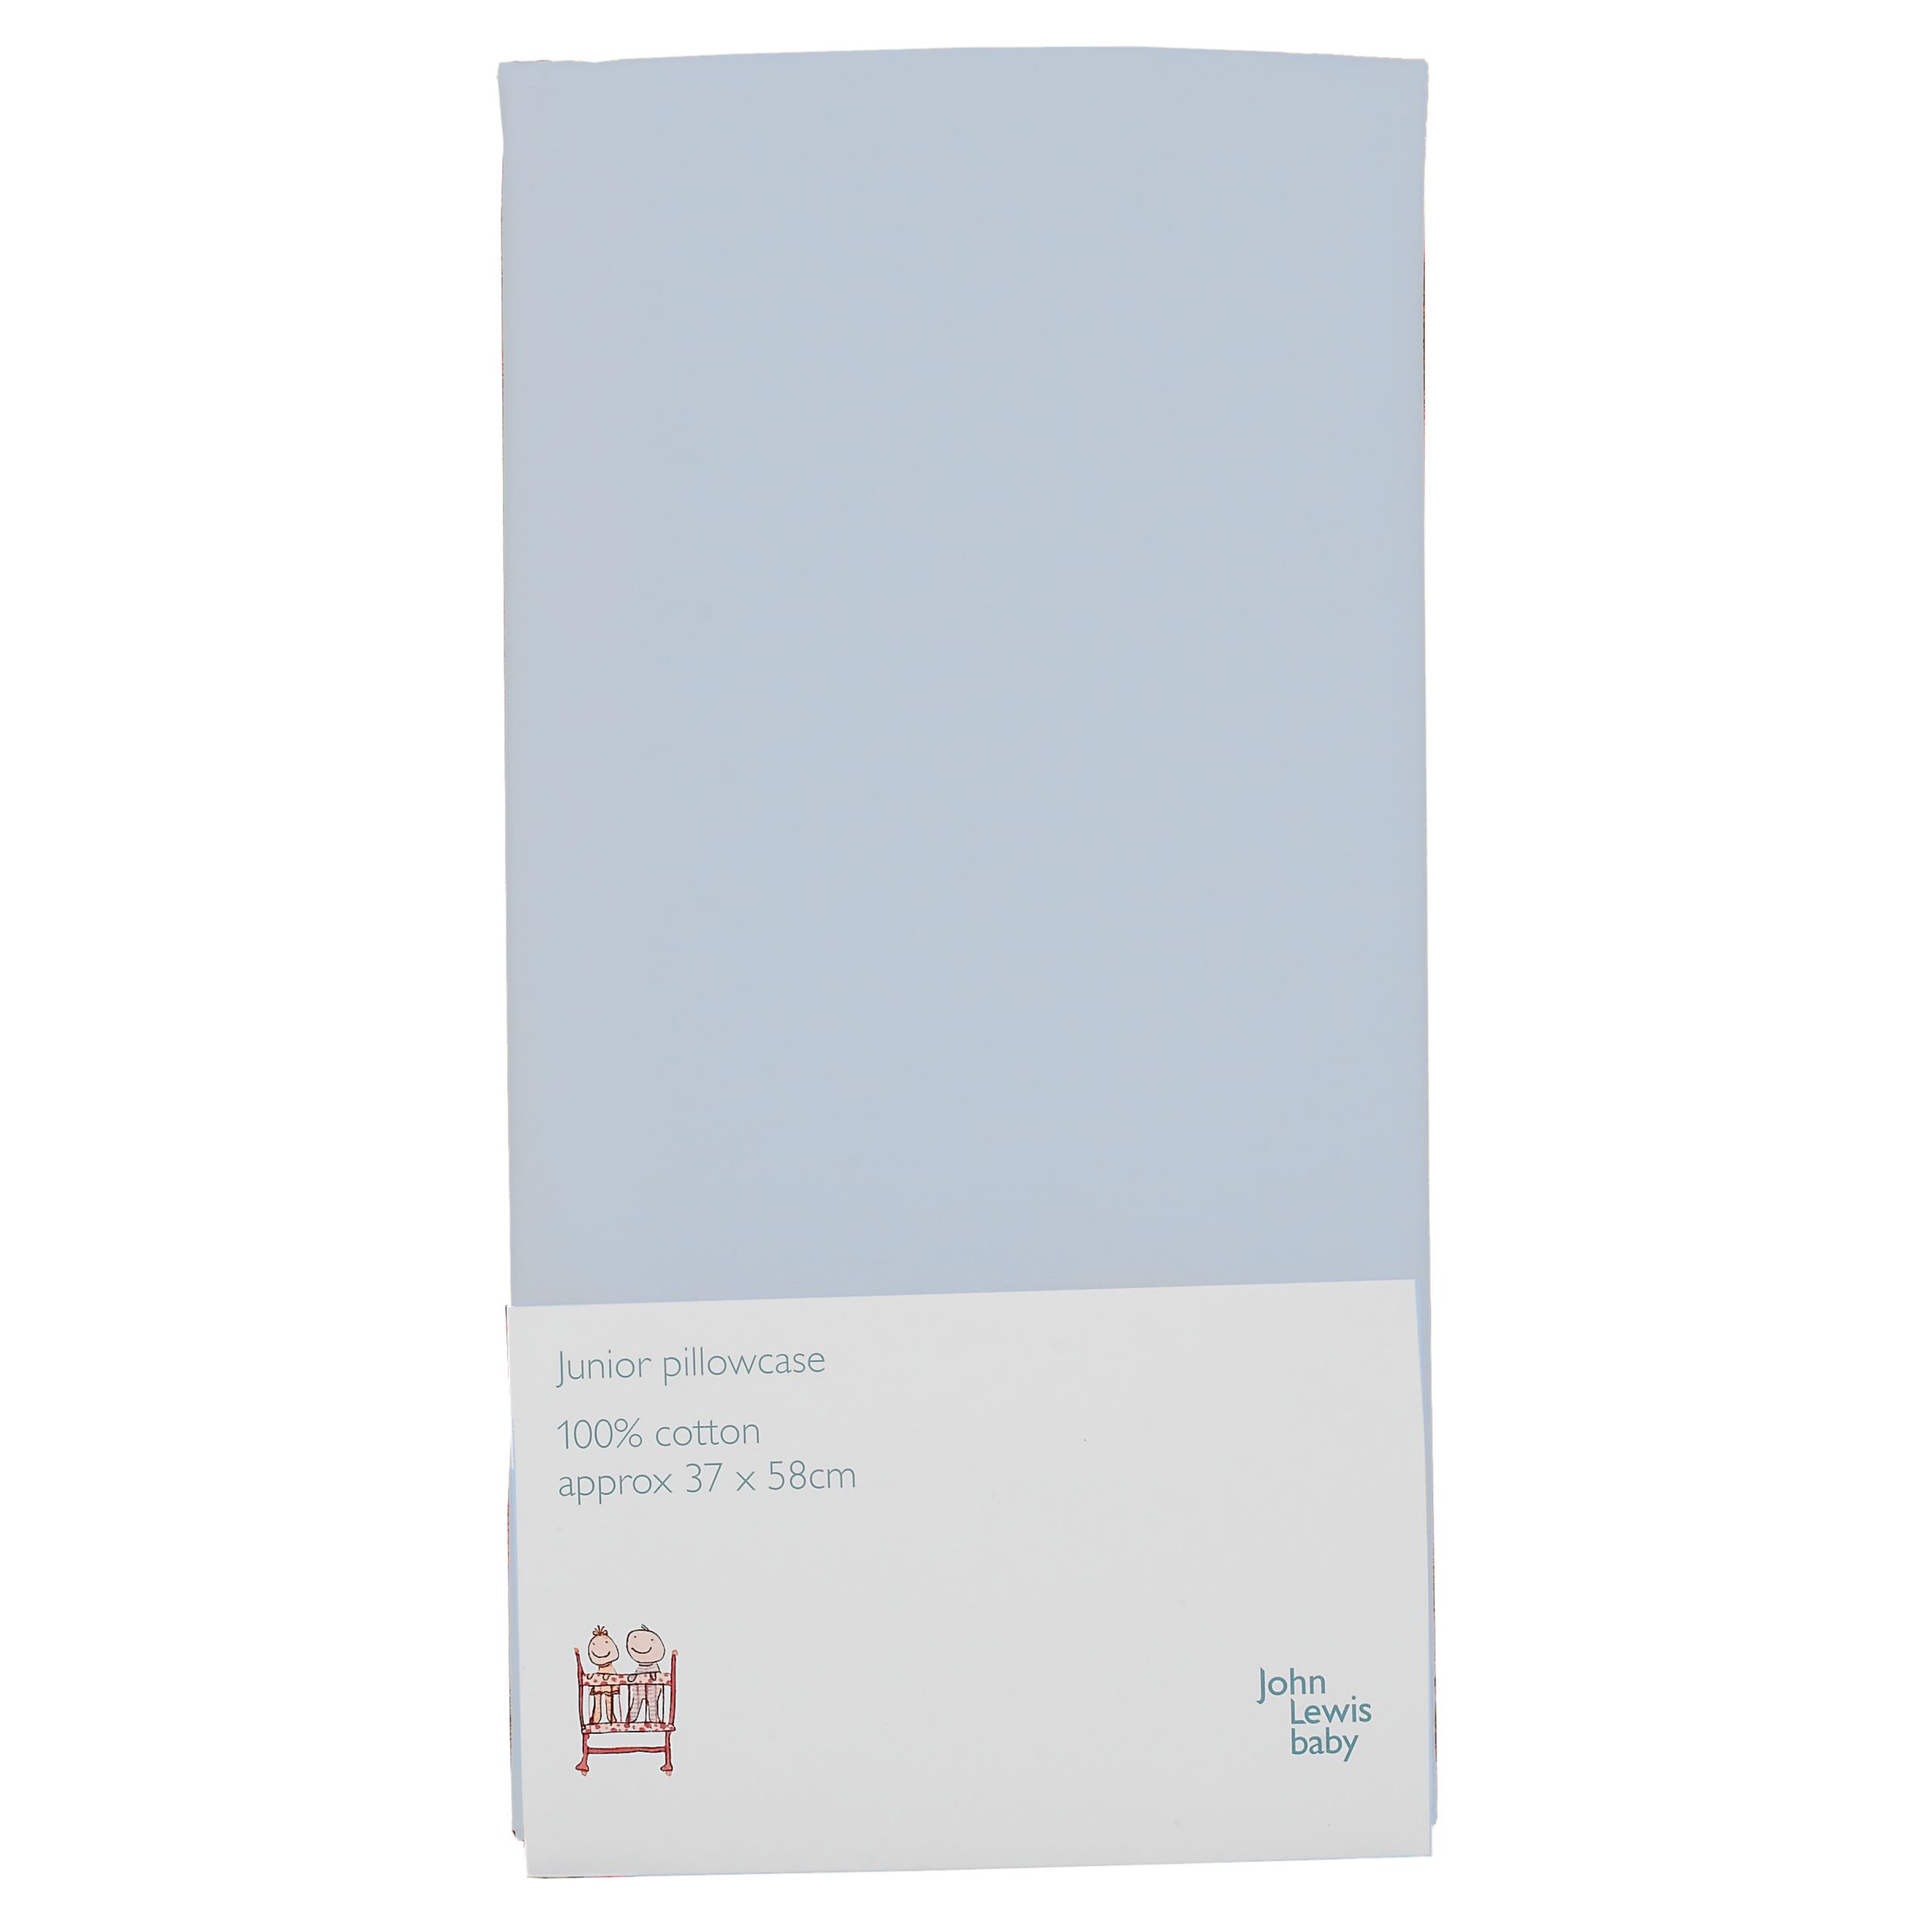 Cot / Cotbed Pillowcase, Sky